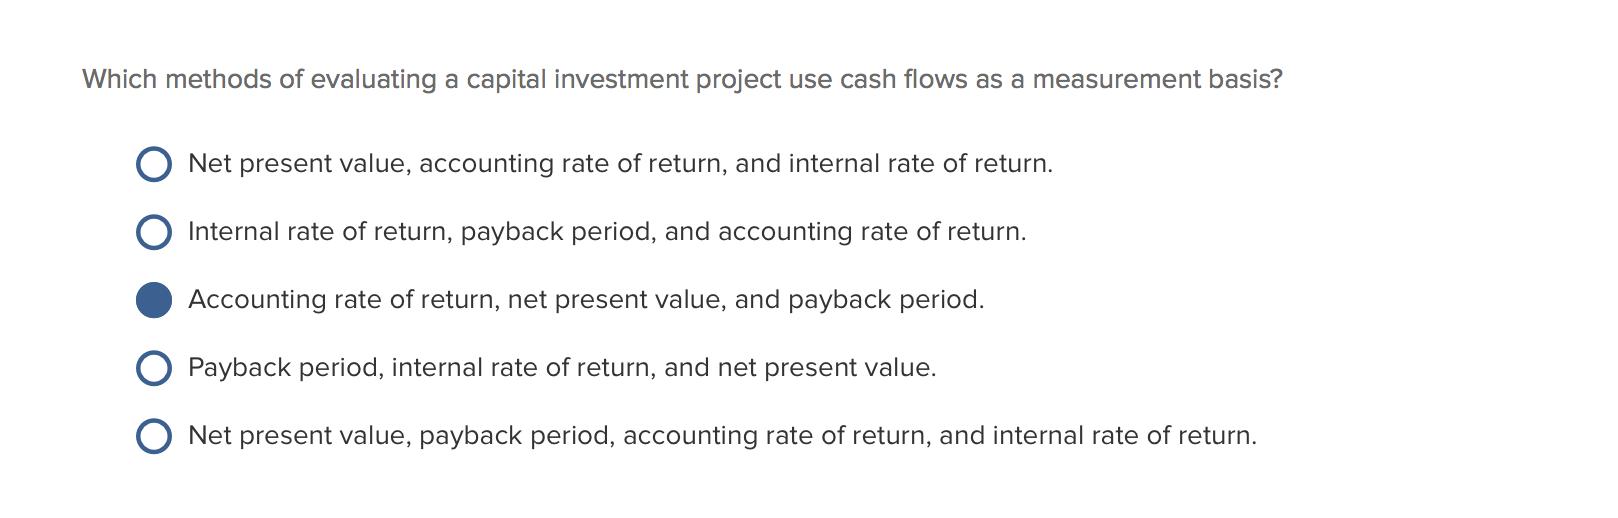 Which methods of evaluating a capital investment project use cash flows as a measurement basis? Net present value, accounting